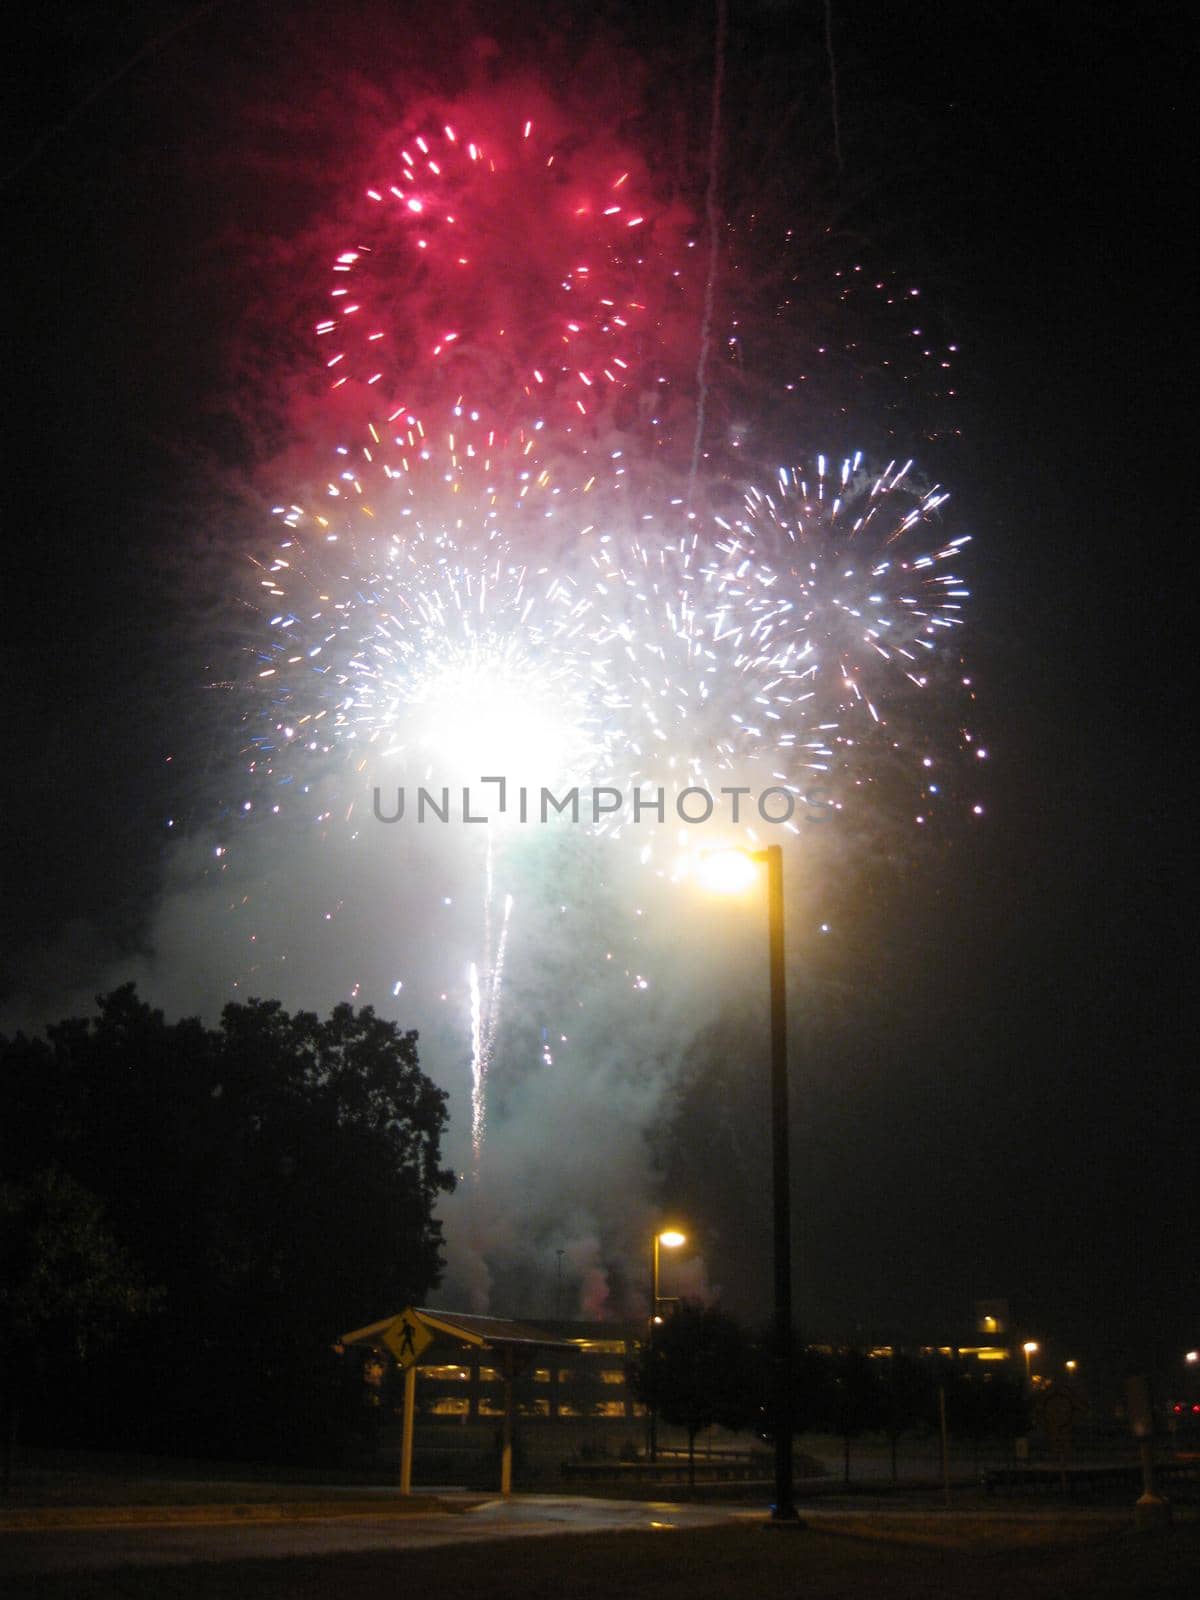 Image of White and red fireworks silhouette trees and a phone pole late at night